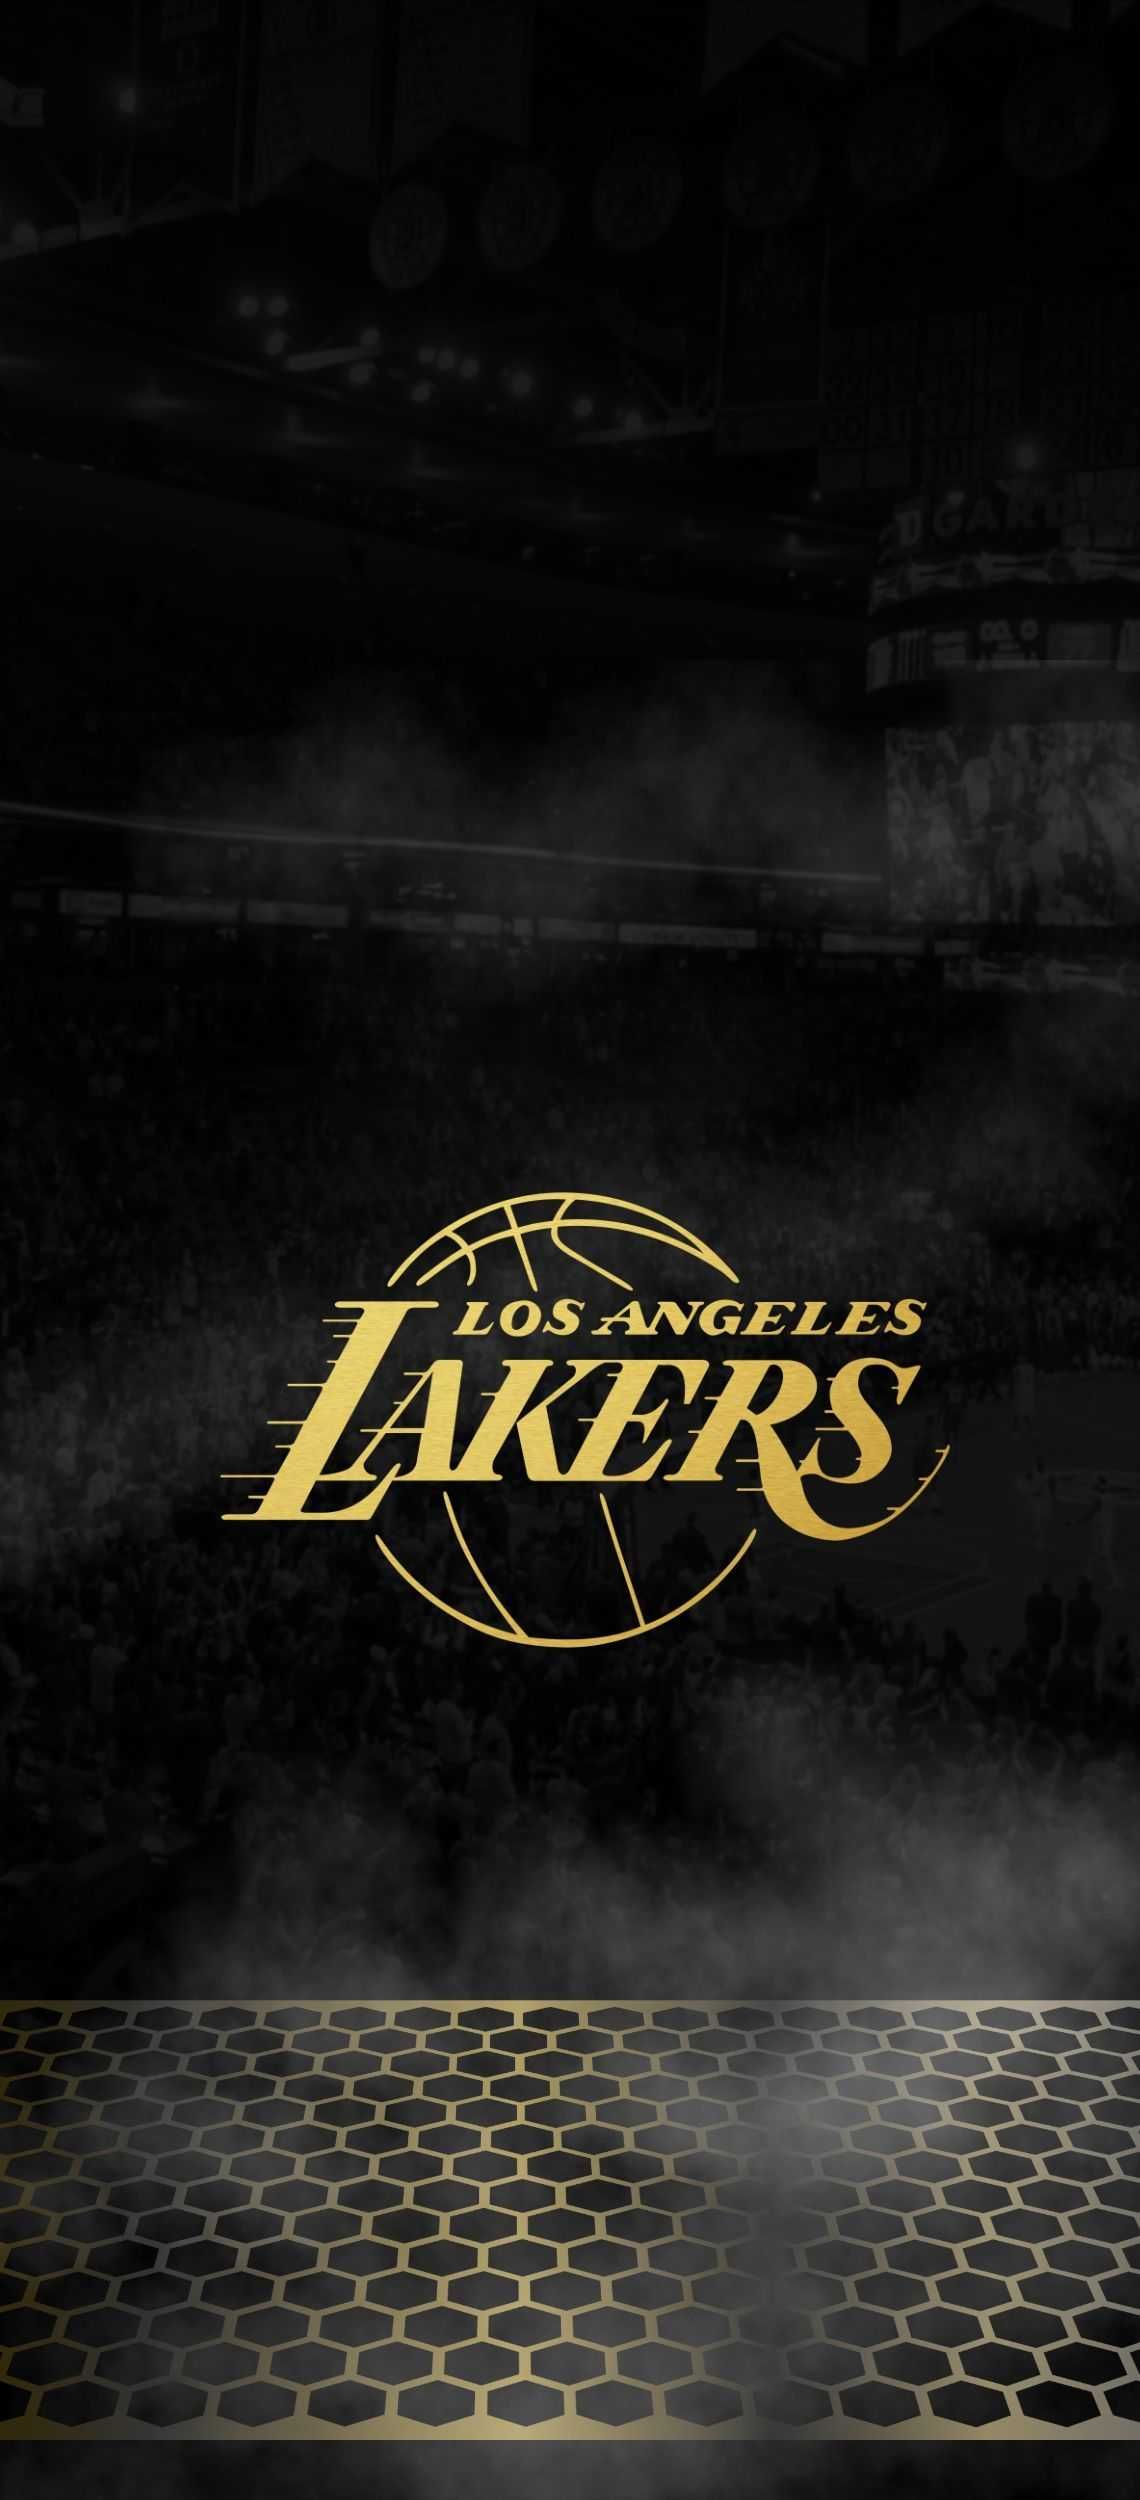 Lakers Wallpaper Browse Lakers Wallpaper with collections of Angeles, Jersey, Kobe, Lakers, Lebron. htt. Lakers wallpaper, Los angeles lakers logo, Nba wallpaper